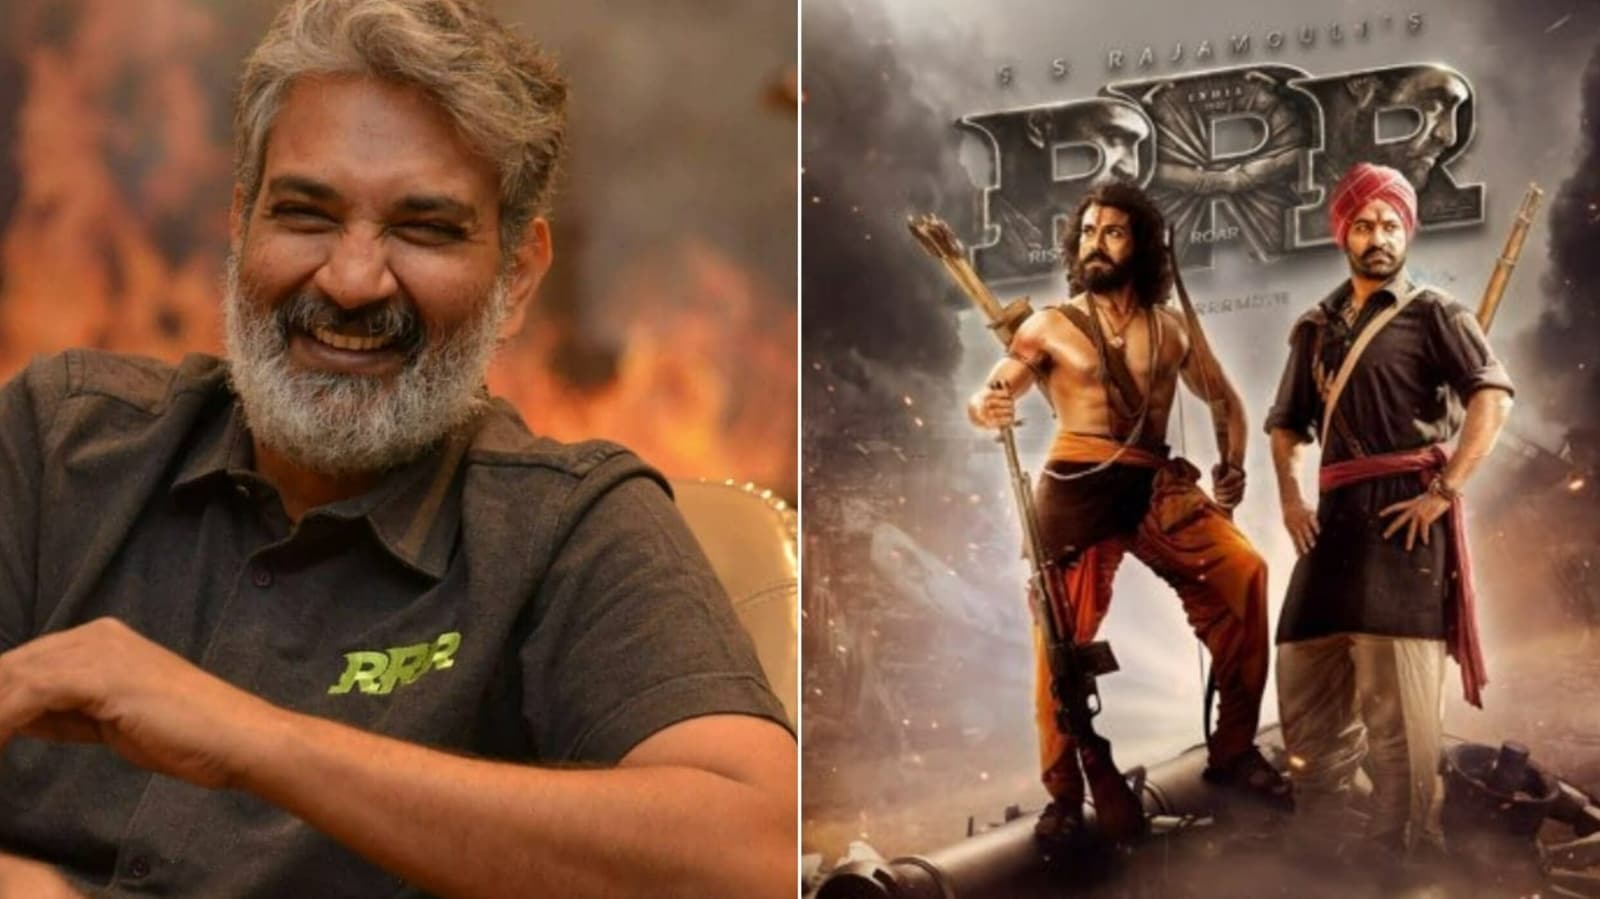 SS Rajamouli’s RRR earns ₹17 lakh from single screening in Los Angeles; filmmaker thanks fans for standing ovation